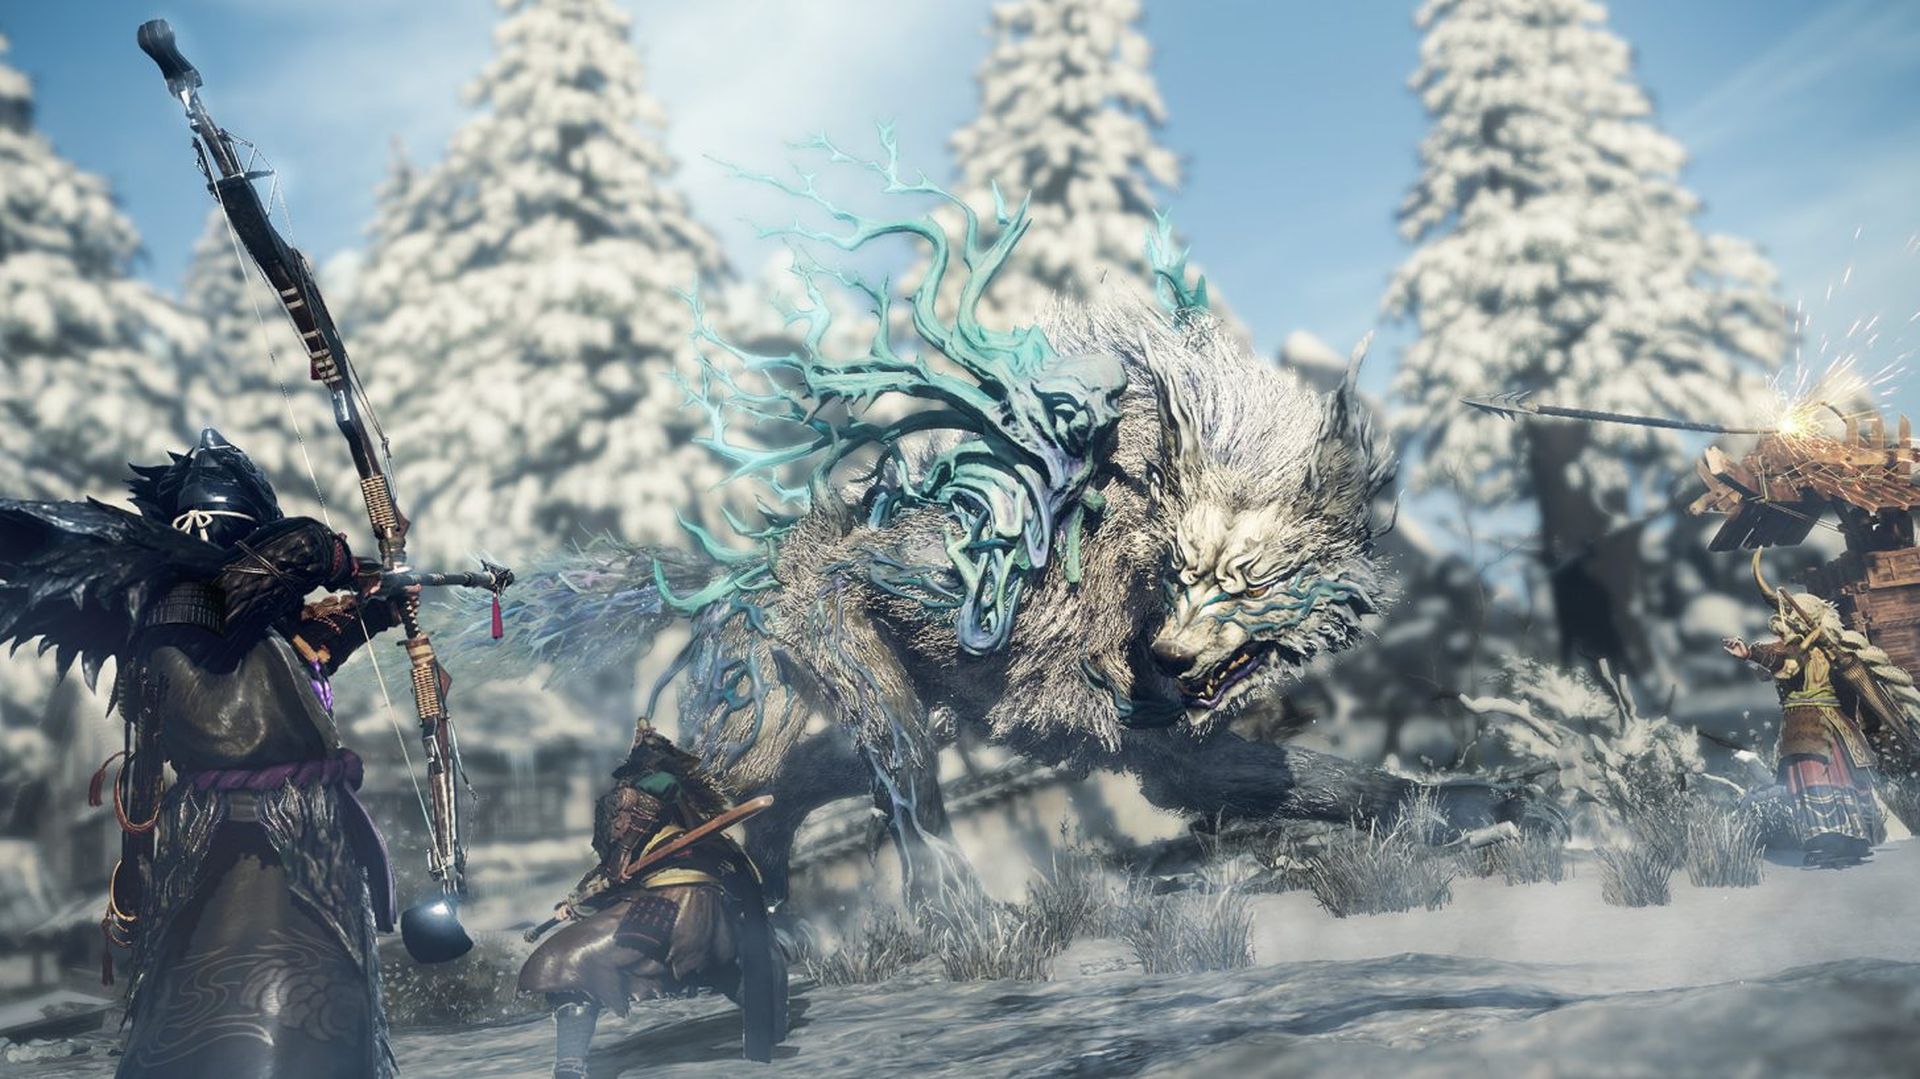 WILD HEARTS is the monster hunting game from EA and Koei Tecmo to be released on February 17, 2023